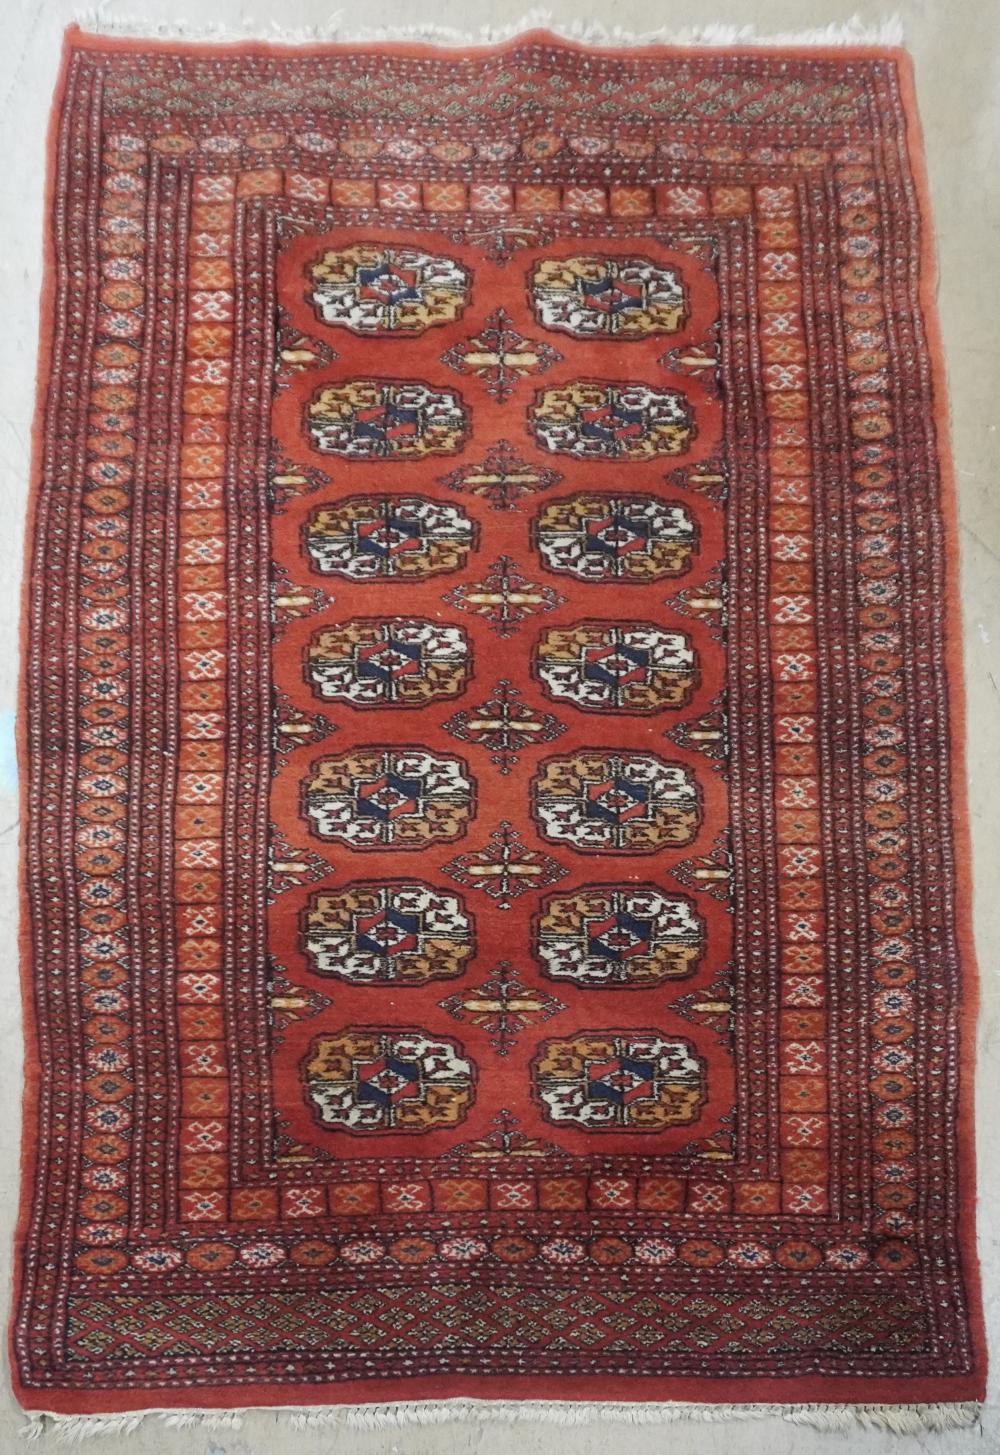 BOKHARA RUG 5 FT 2 IN X 3 FT 2 2e8944